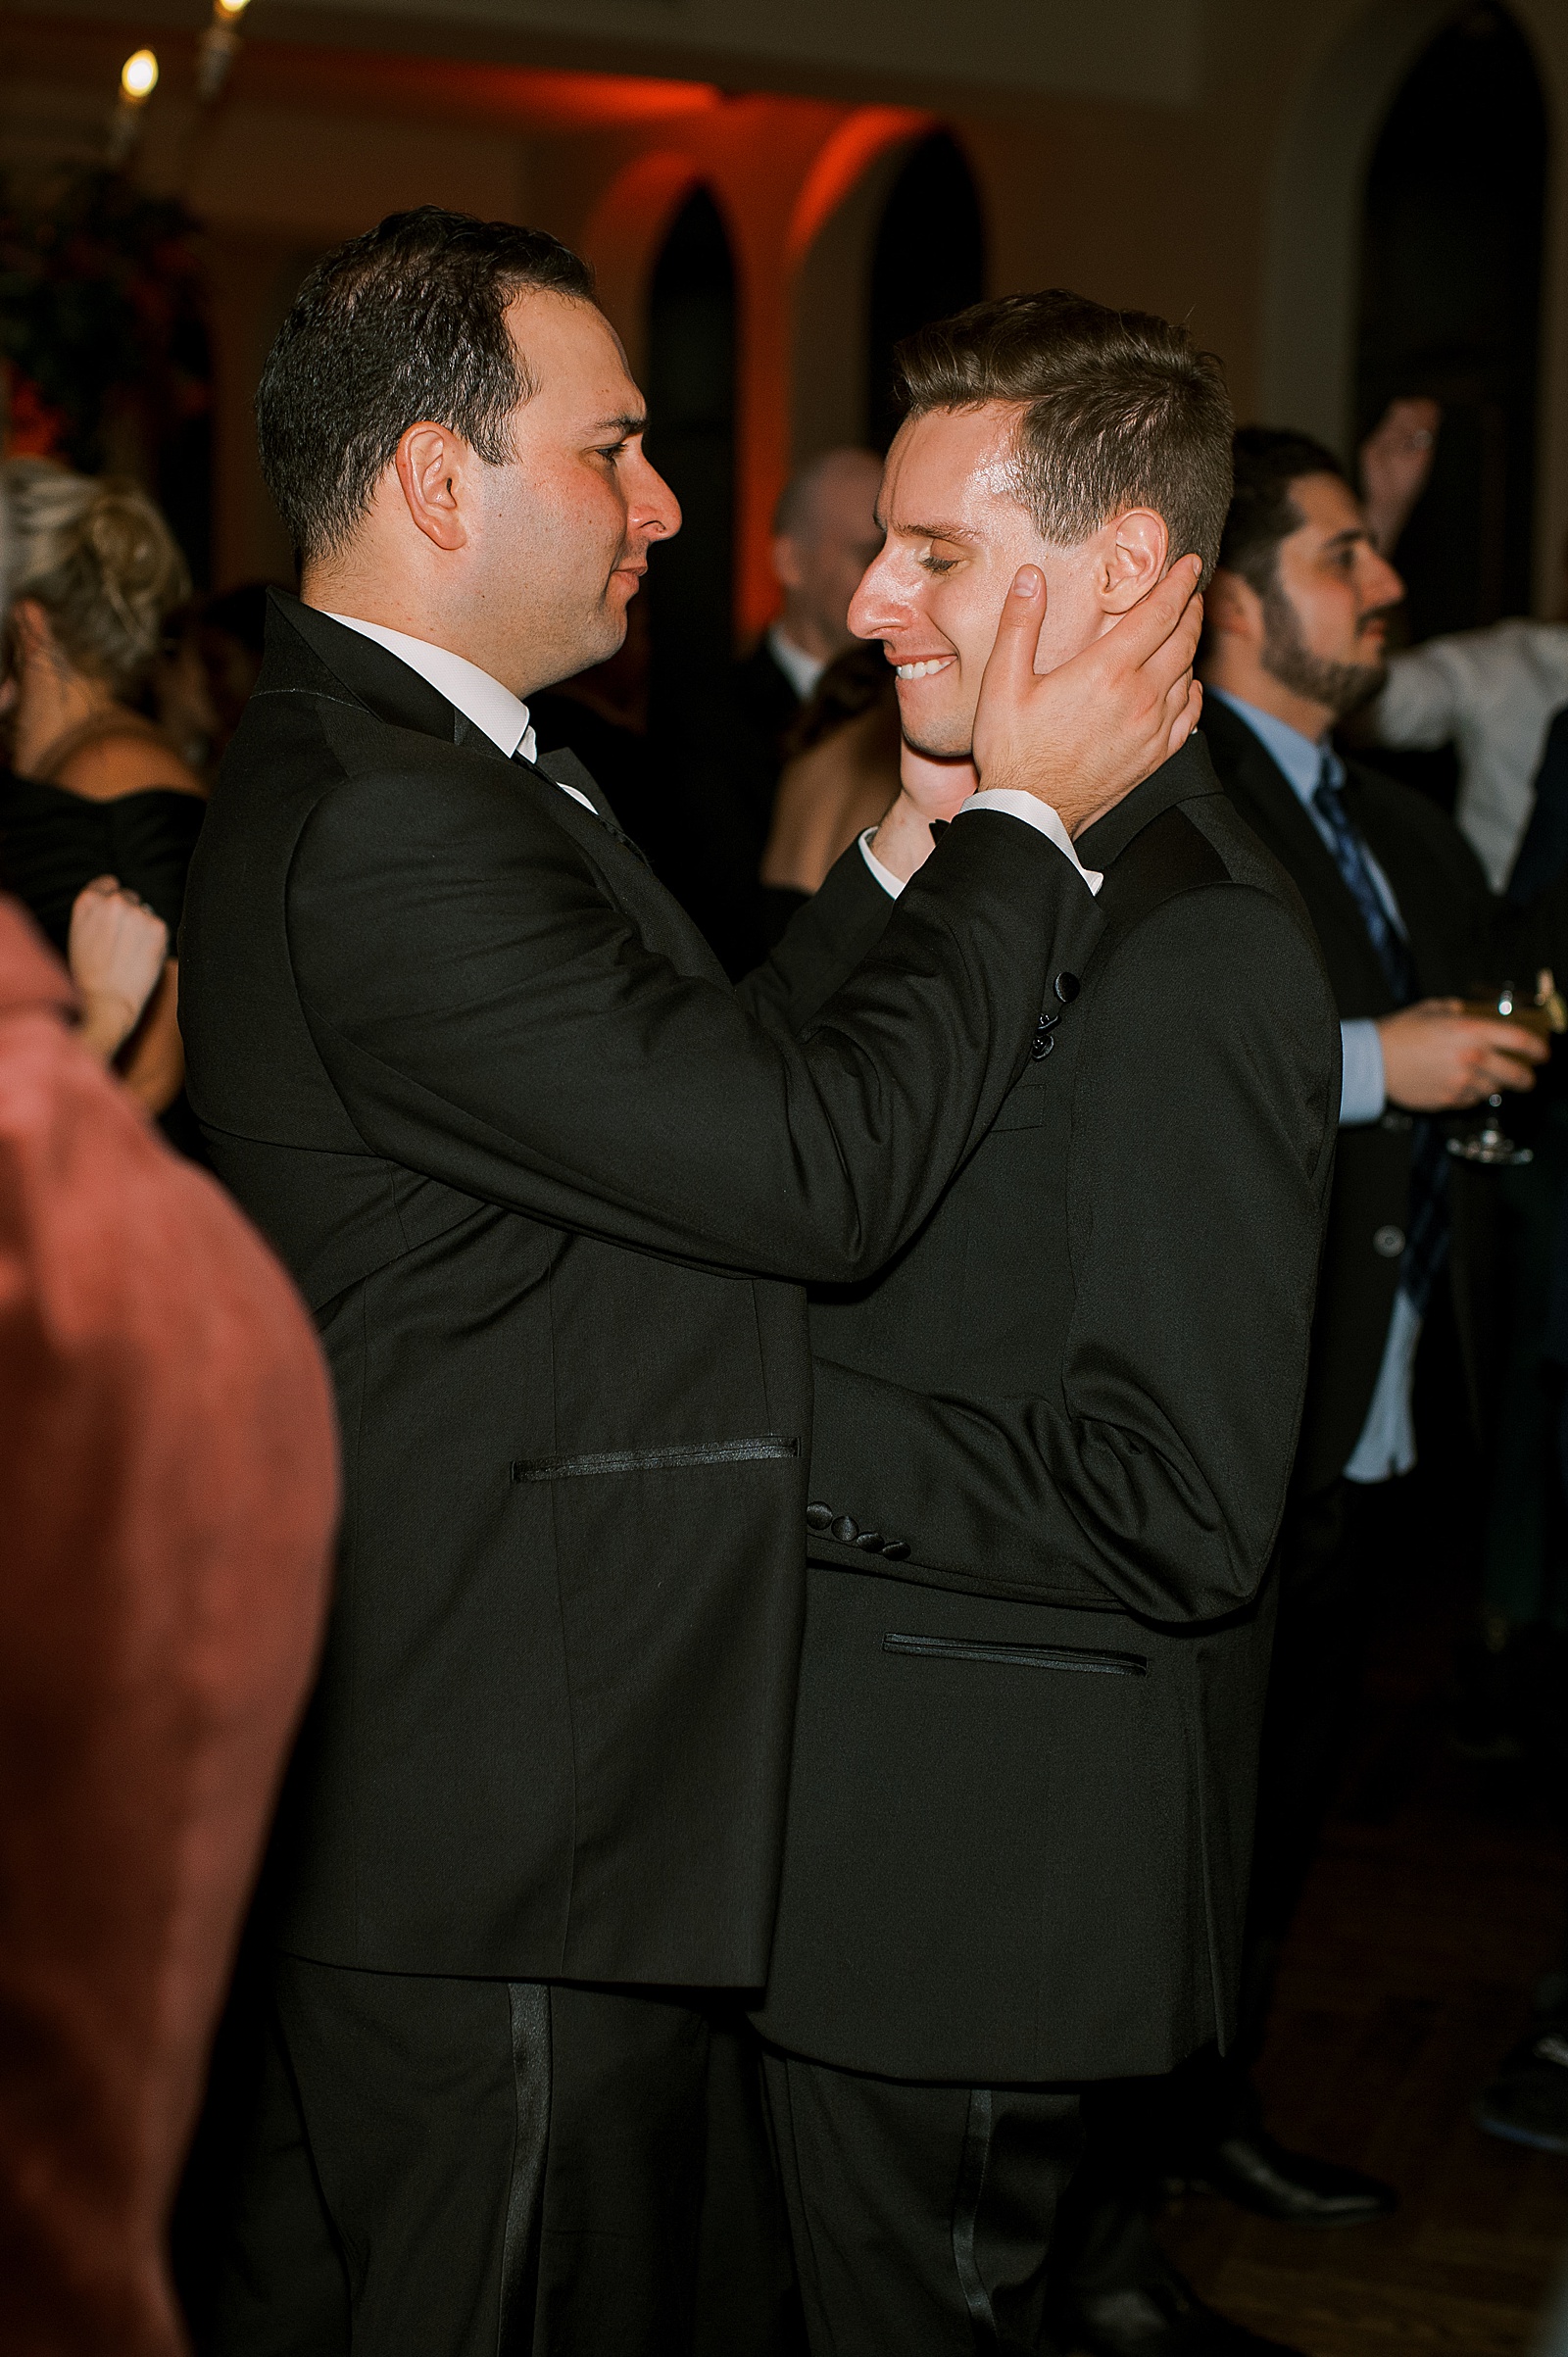 Two men embrace on the dance floor at a wedding reception.